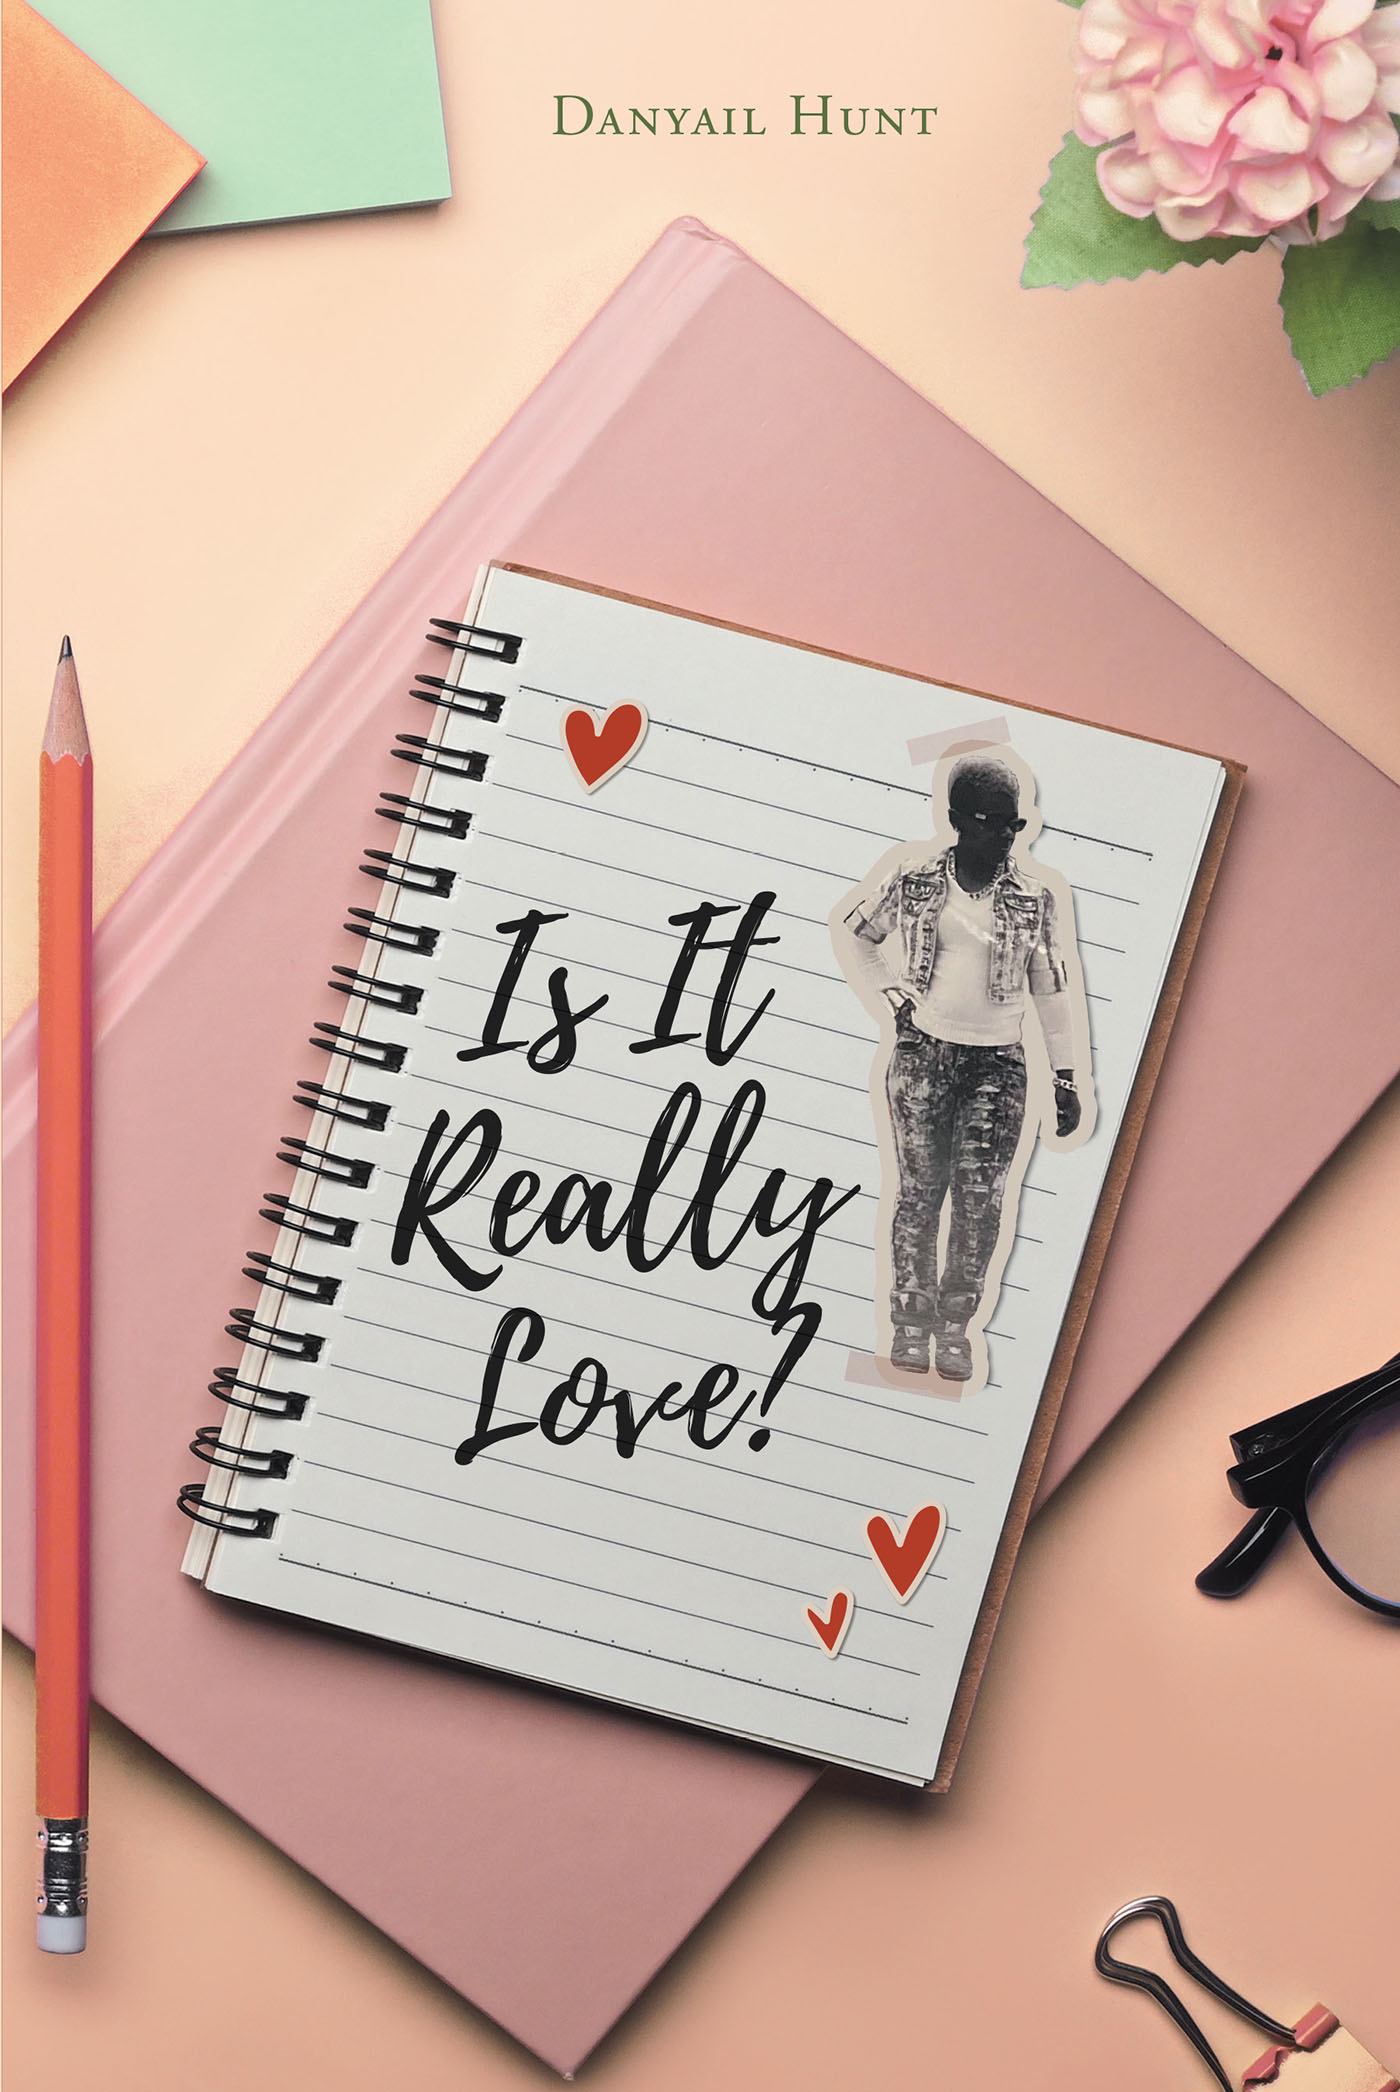 Author Danyail Hunt’s New Book, “Is It Really Love?” Explores the Author’s Journey as She Searches for a Lasting Love Despite the Challenges Along the Way